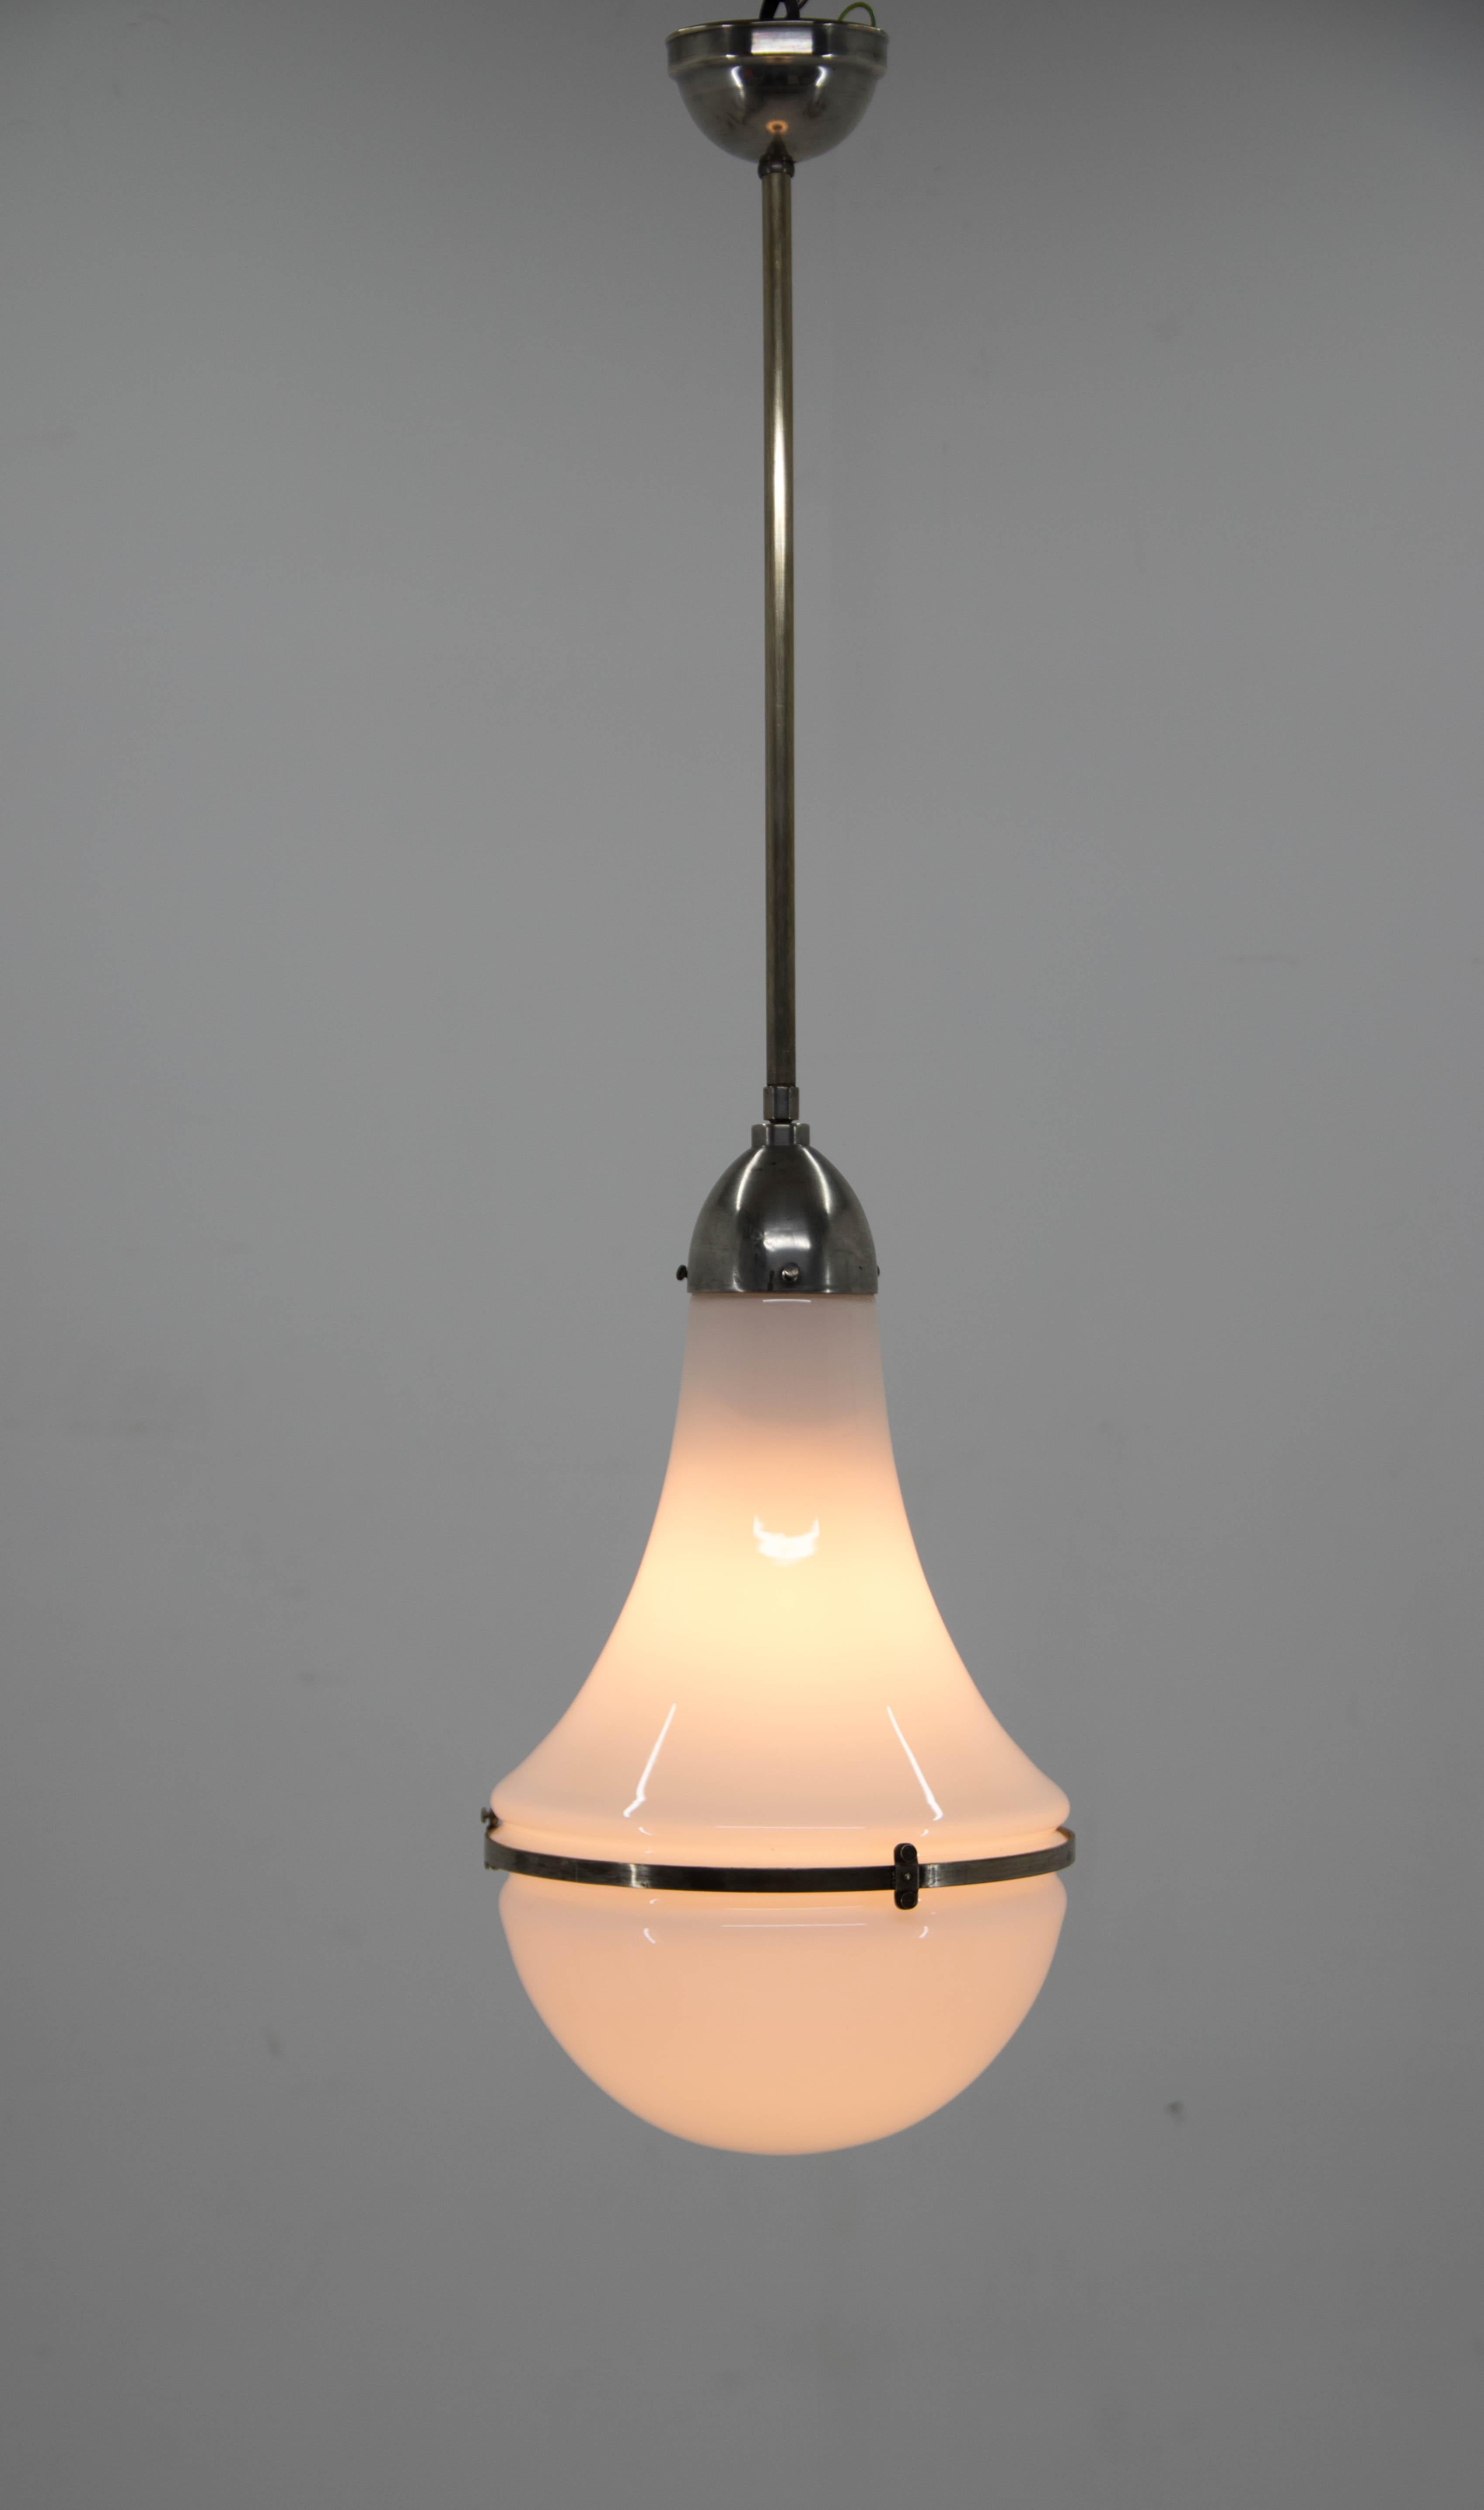 Nickel-plated pendant with adjustable height: max. 104cm, min. 90cm
Glass in excellent condition.
Nickel with age patina - polished.
Rewired: 1x40W, E25-E27 bulb.
US wiring compatible.
 